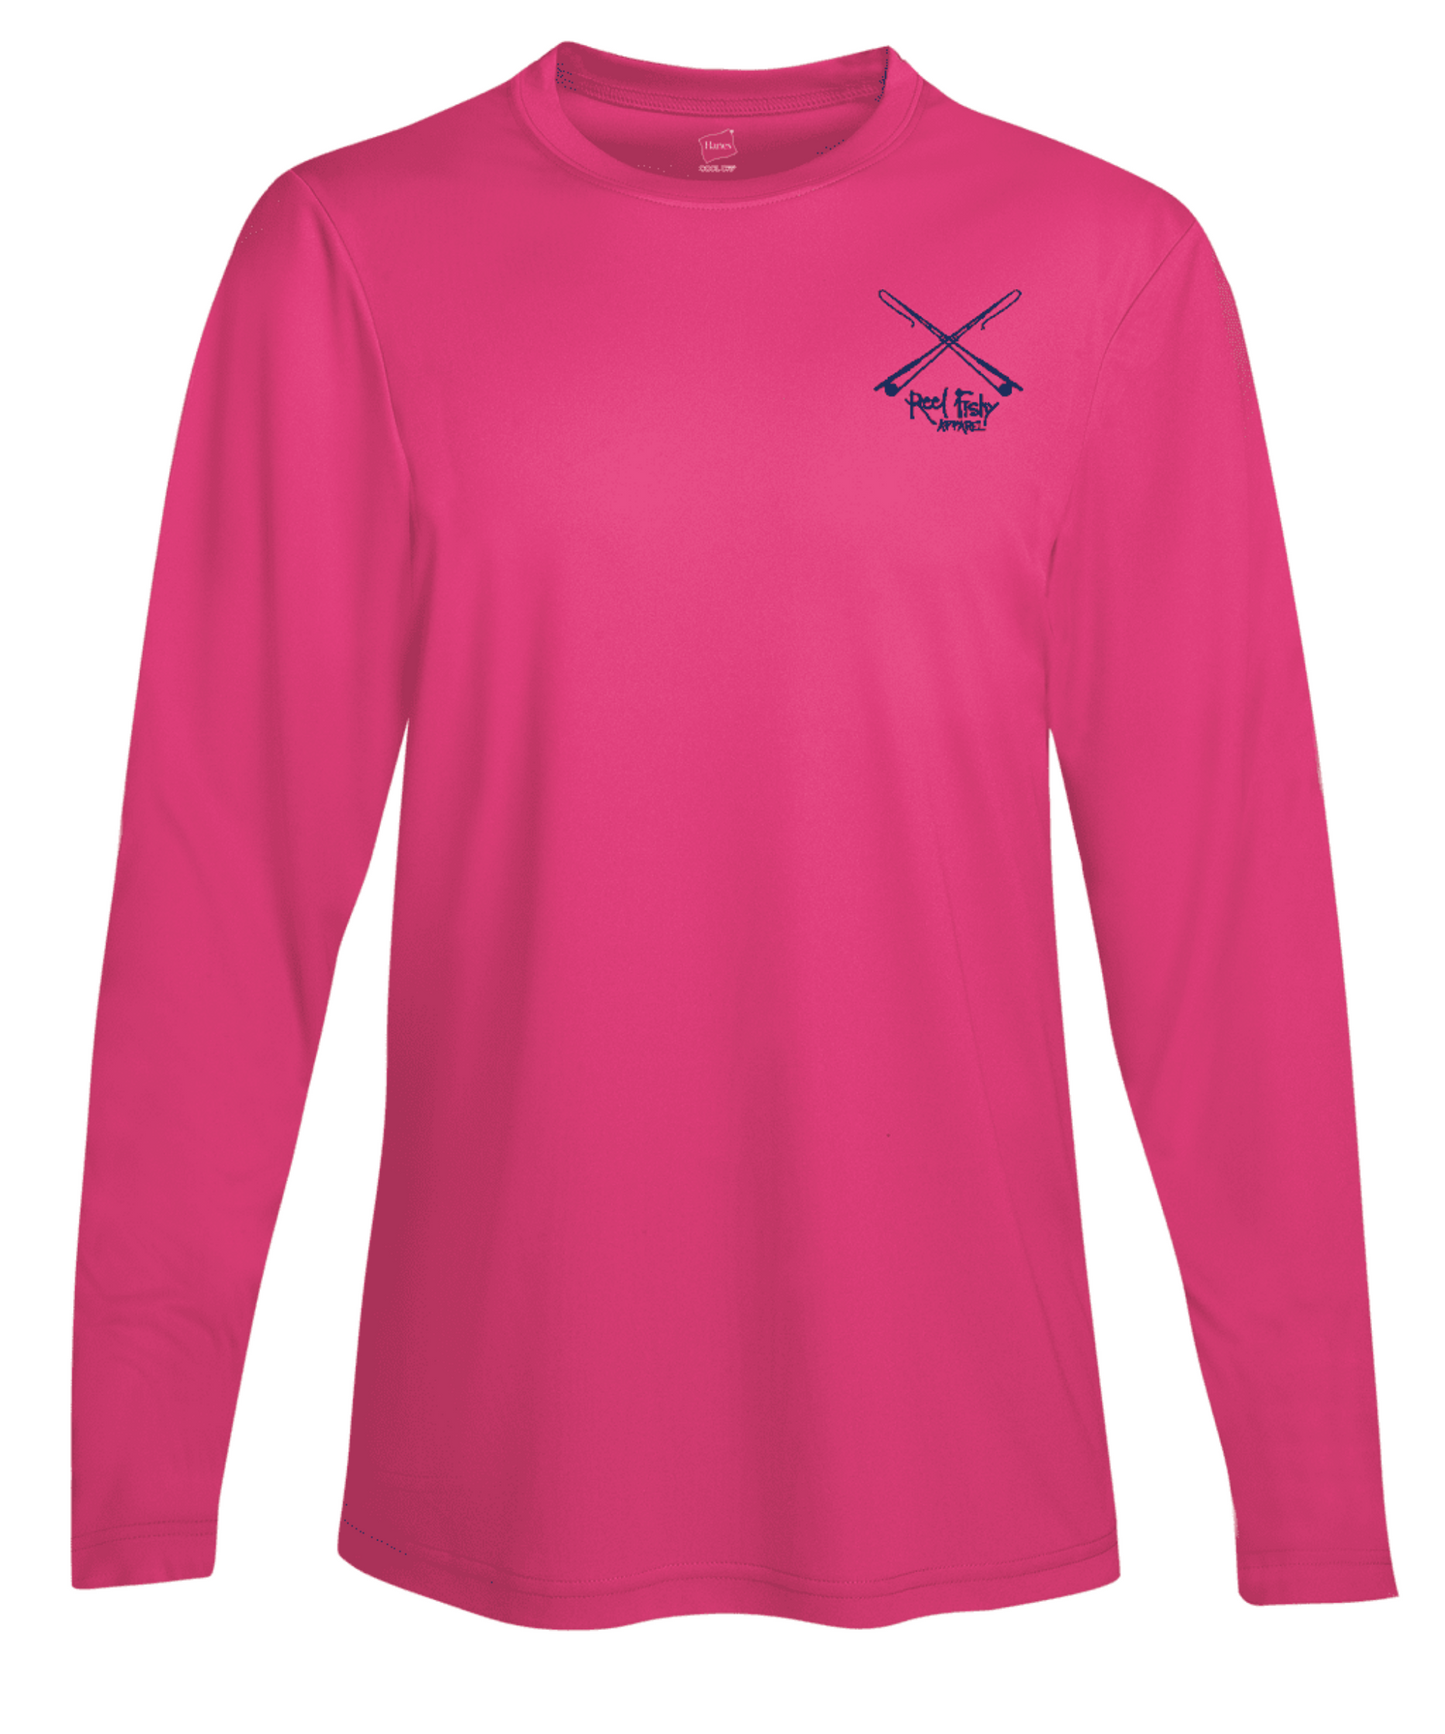 Performance Dry-Fit Tarpon Fishing long sleeve shirts with Sun Protection by Reel Fishy in Pink (front)